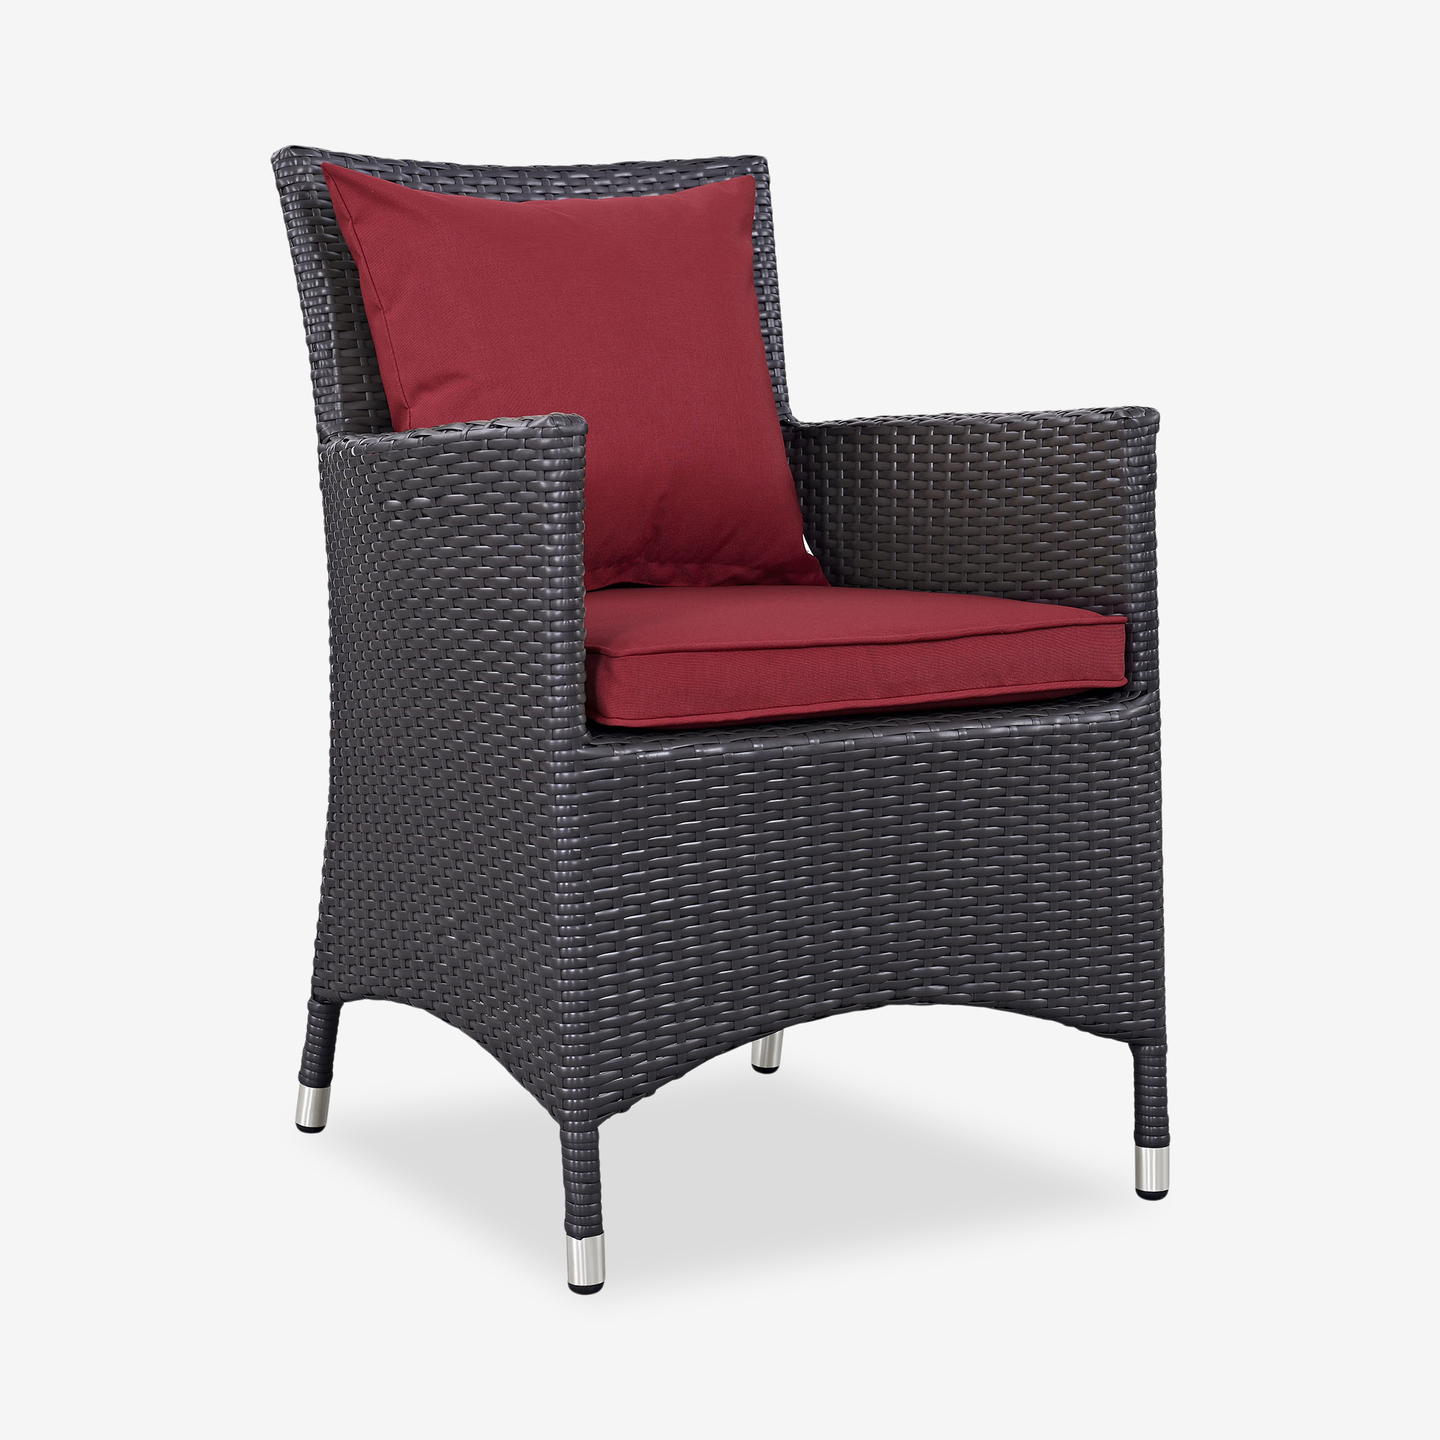 991_Outdoor-Chair-Red-3Q_2020